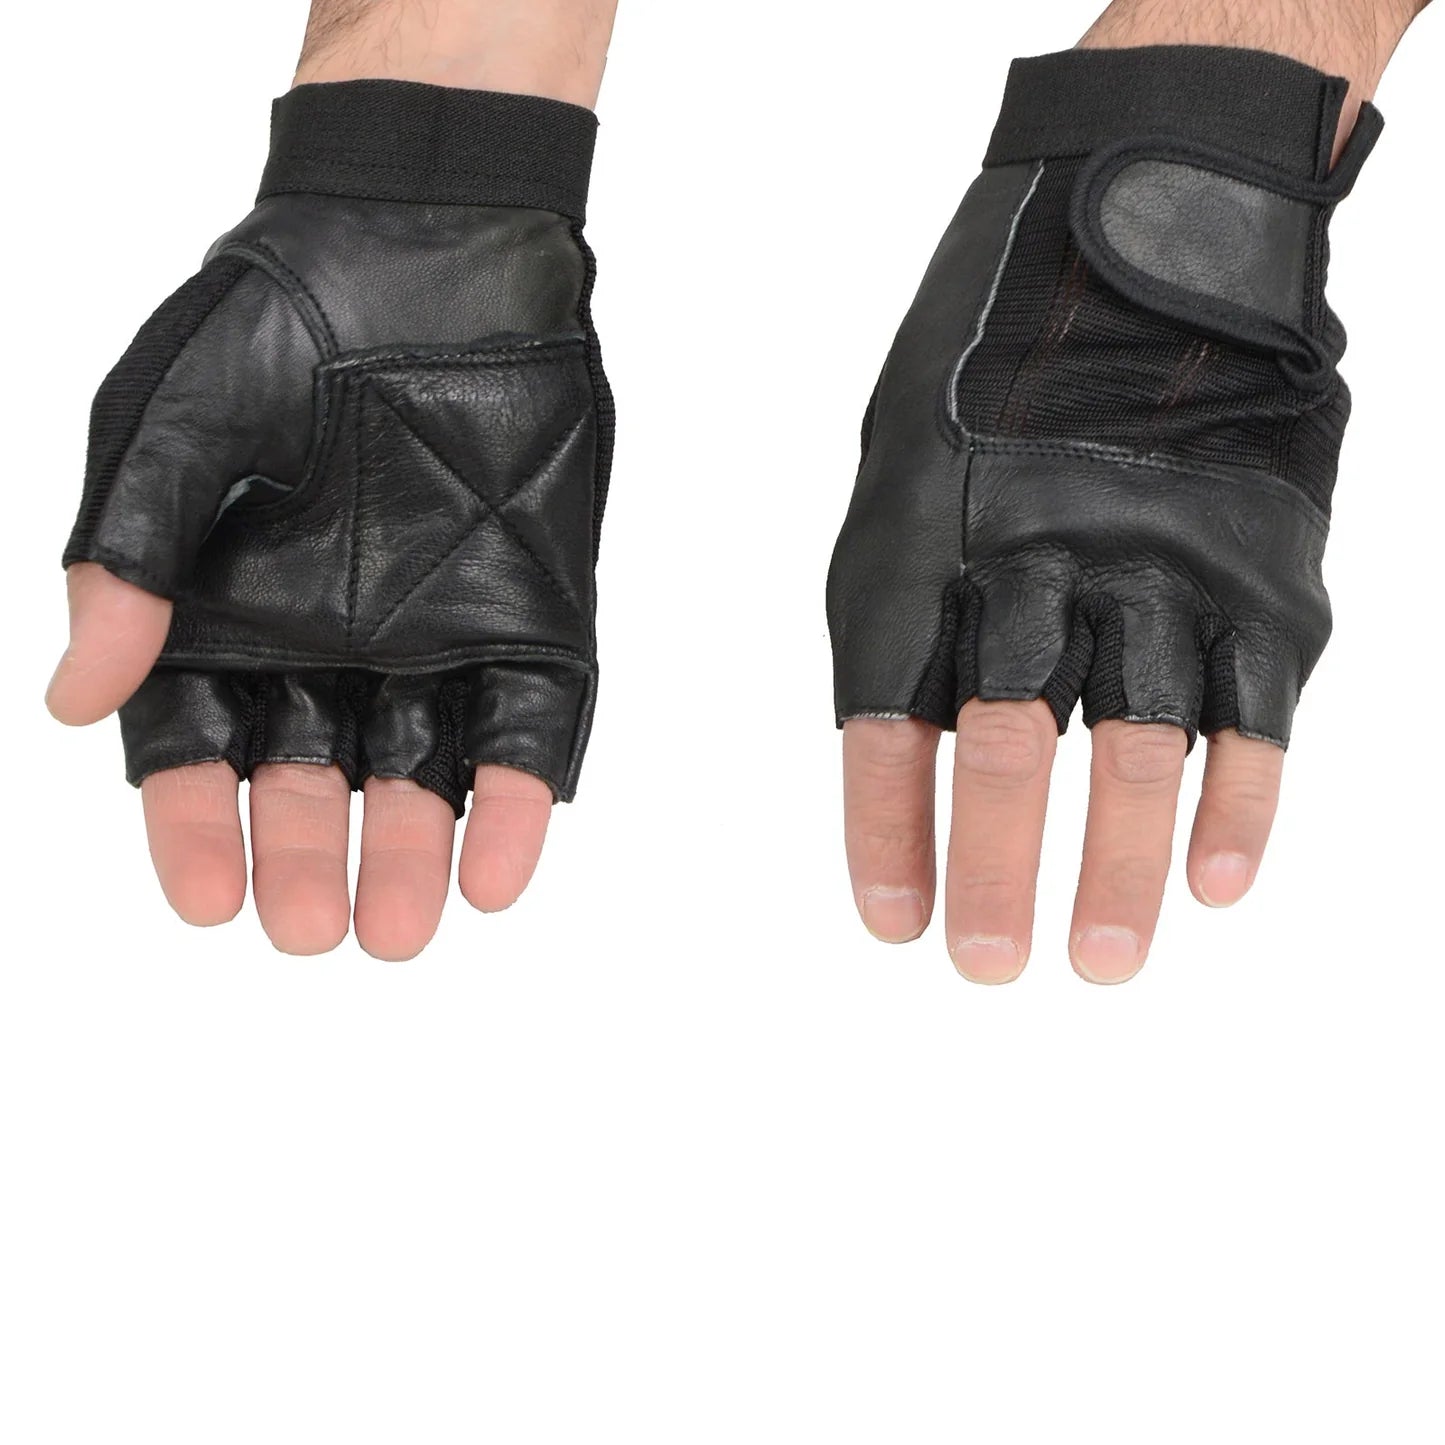 Men's Black Leather Gel Padded Palm Fingerless Motorcycle Hand Gloves W/ Breathable ‘Mesh Material’